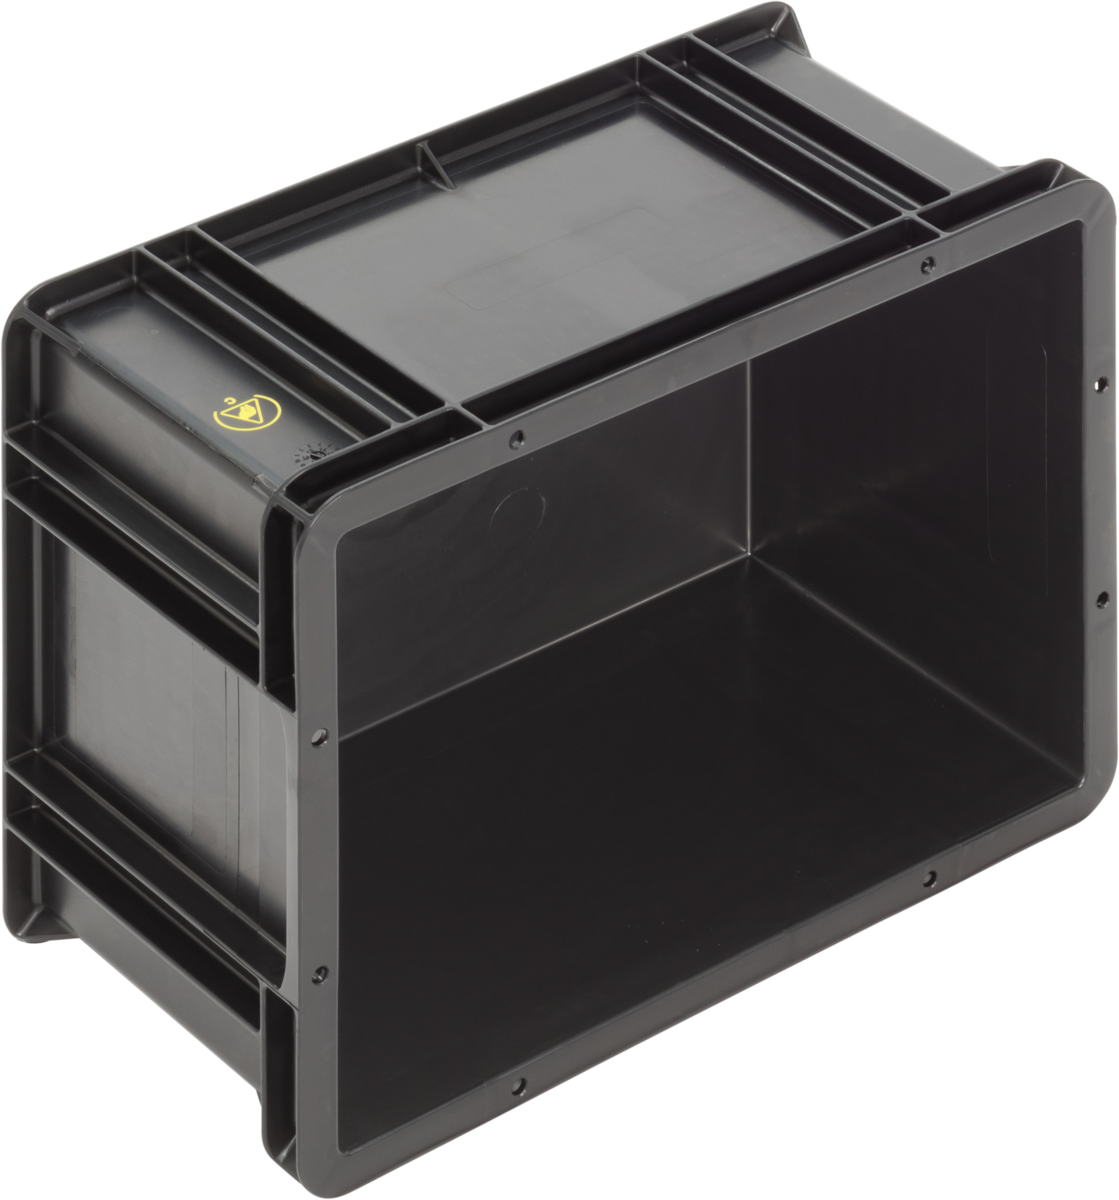 ESD-Safe-SGL-Norm-Stacking-Bin-Containers-Flat-Base-Ref.-4320.007.992_1004394_400x300x212_03